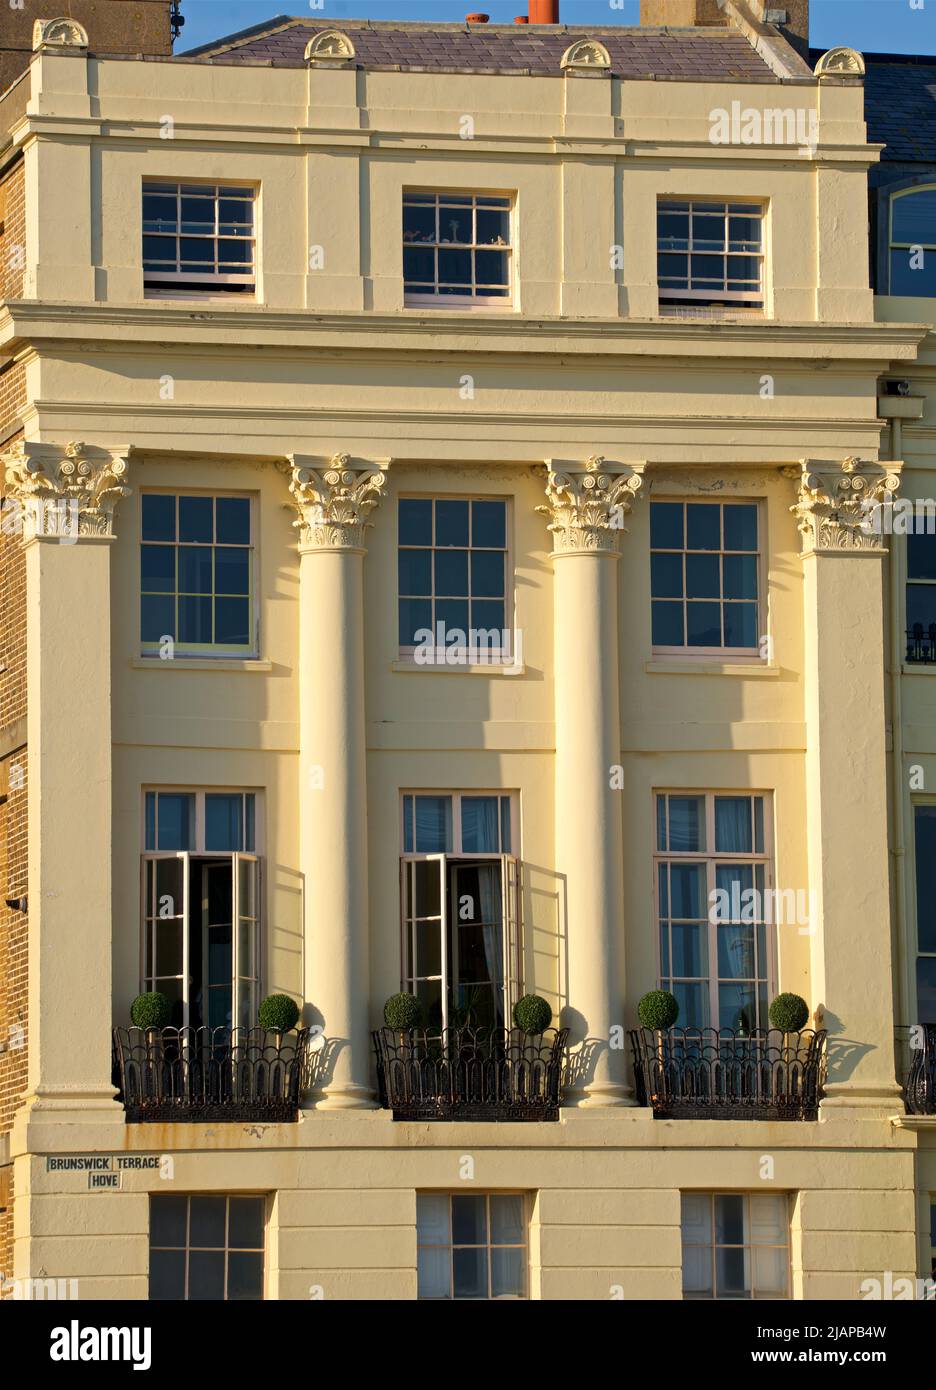 The facade of a Regency townhouse on Brunswick Terrace, part of a complex of Georgian townhouses in Hove on Brighton and Hove seafront.  East Sussex, England UK Stock Photo